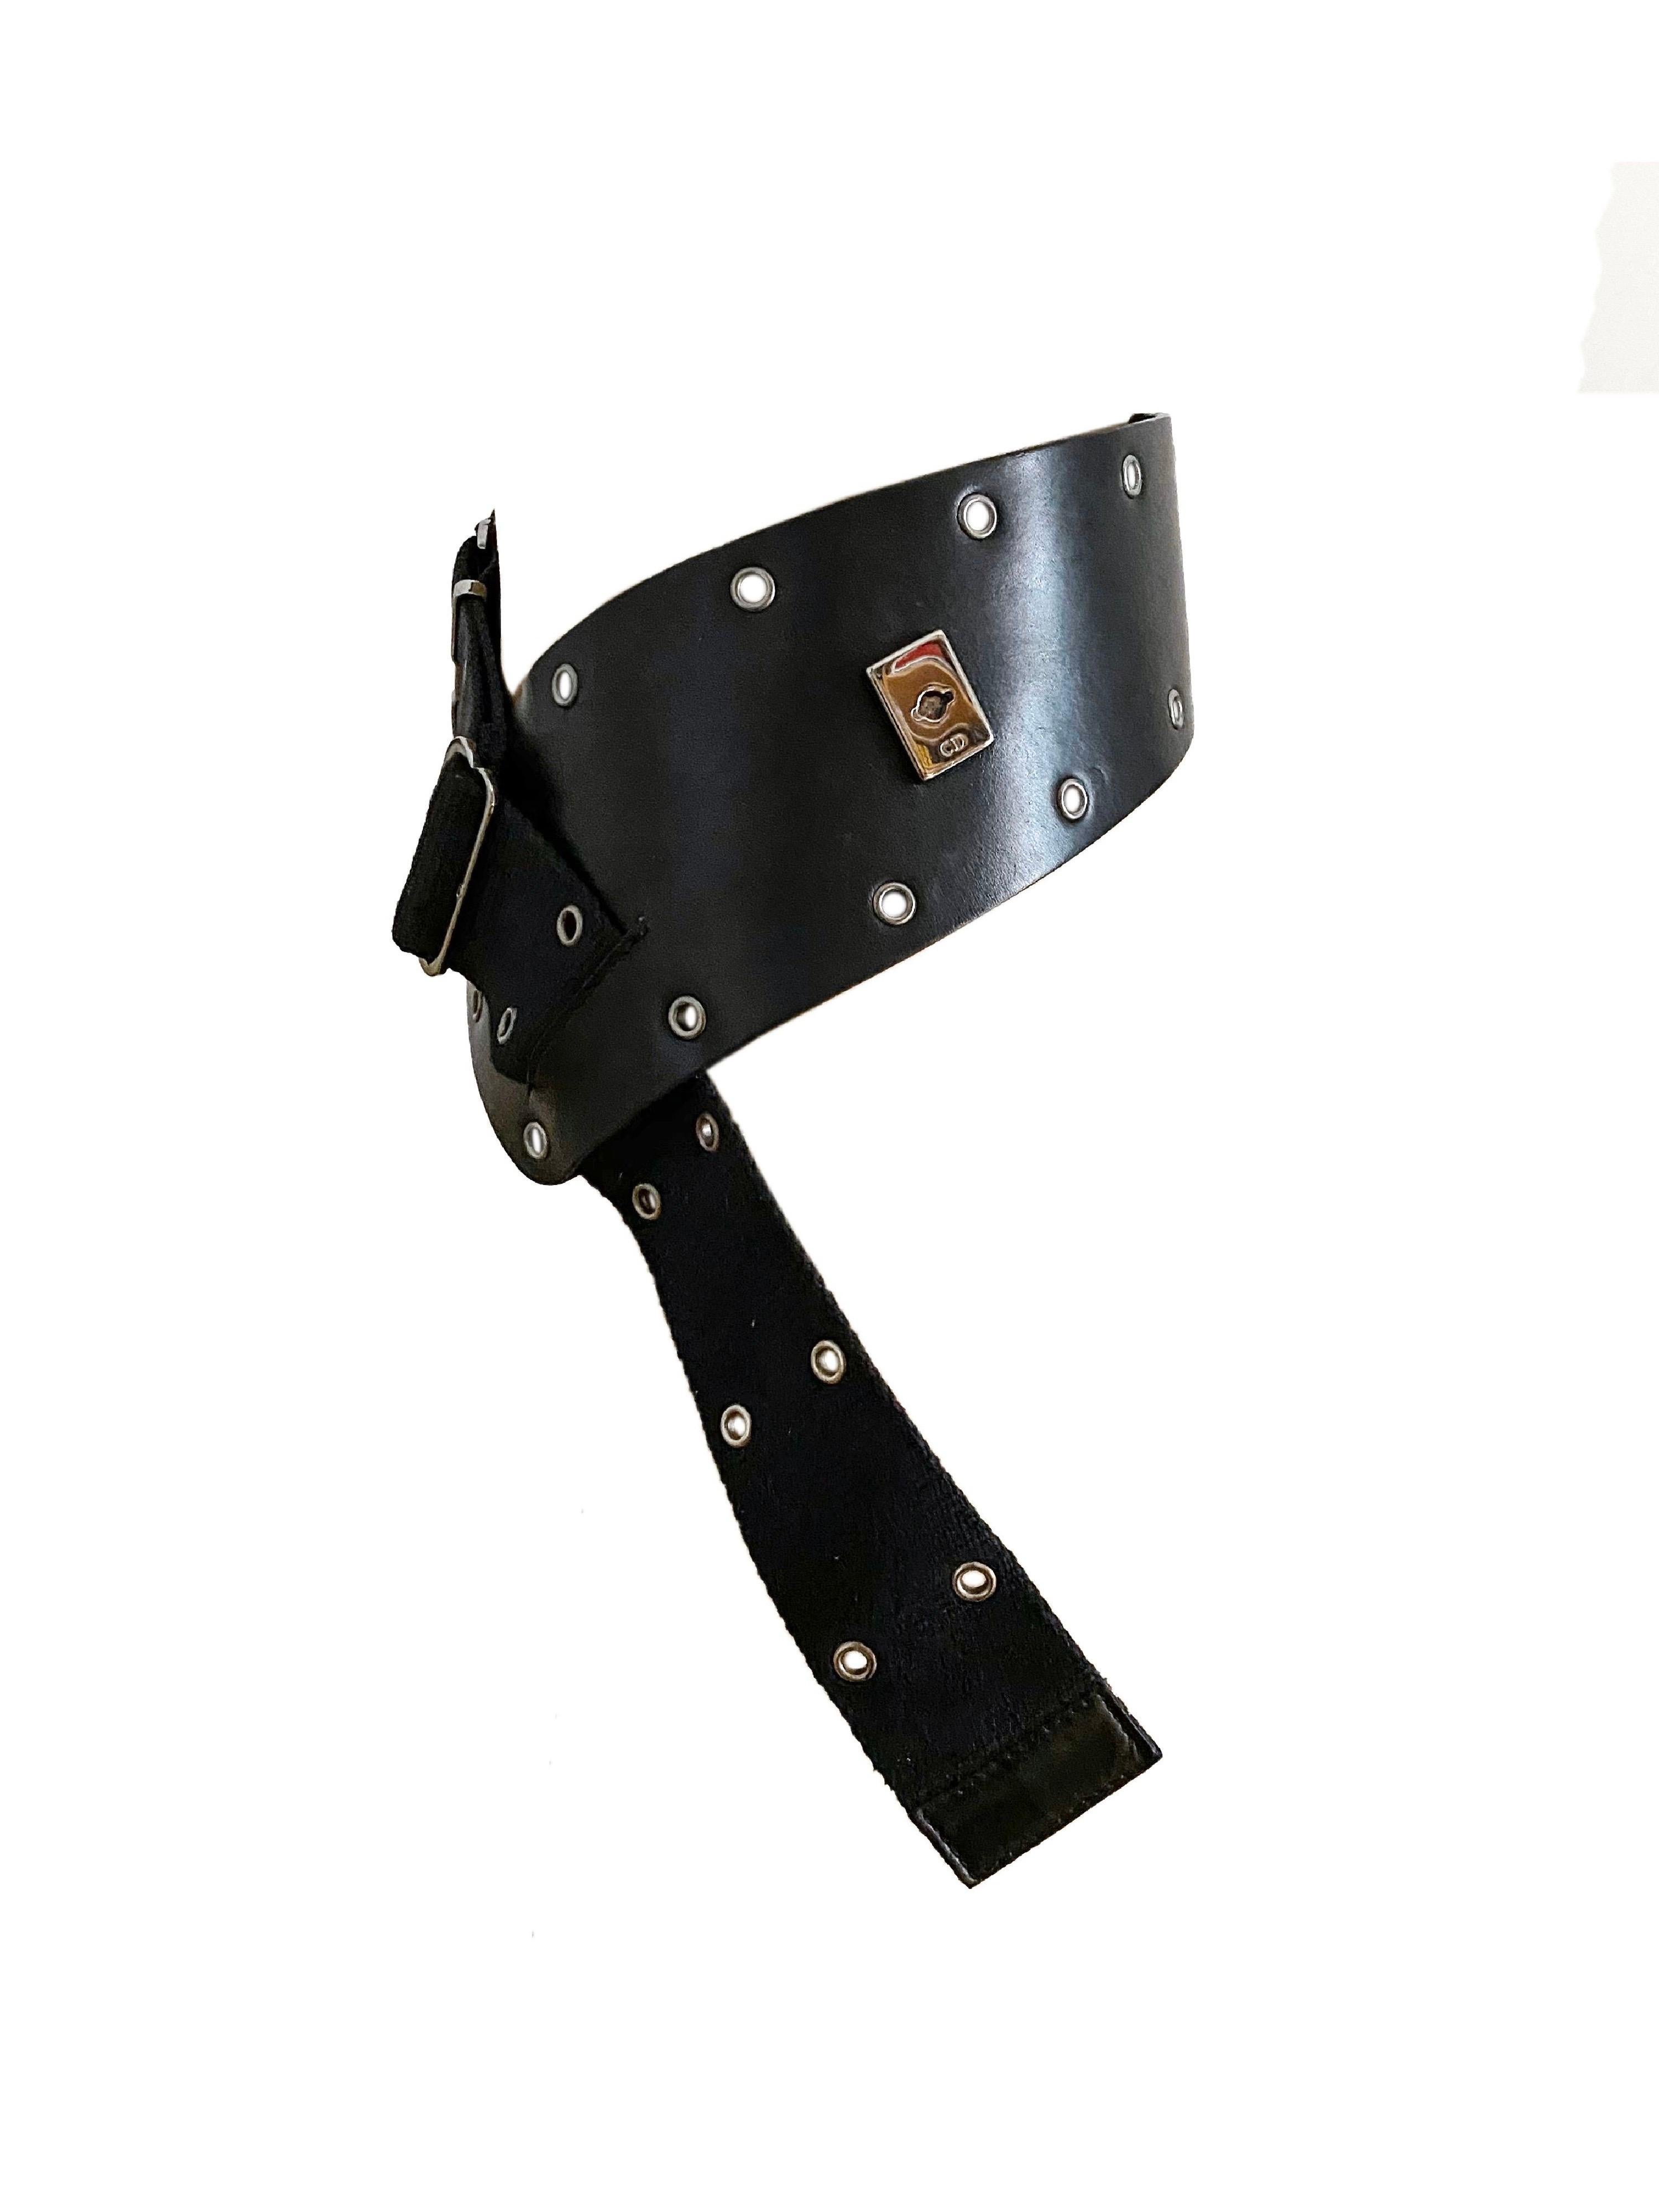 Christian Dior by John Galliano black leather studded chunky belt, with adjustable fabric strap, from the Fall/Winter 2002 